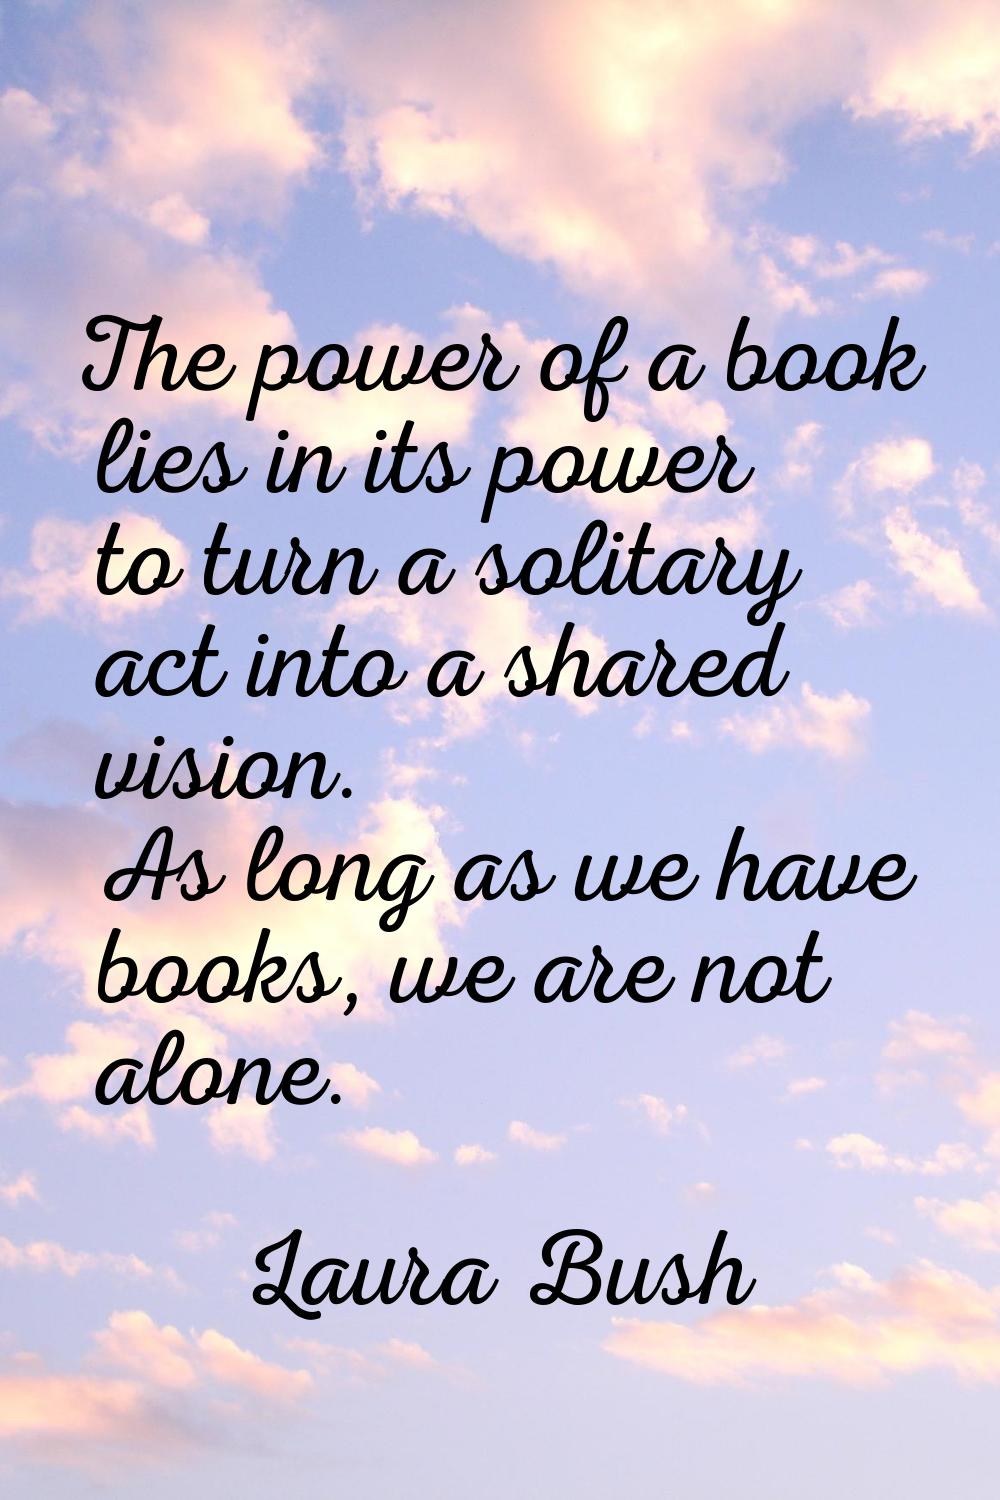 The power of a book lies in its power to turn a solitary act into a shared vision. As long as we ha